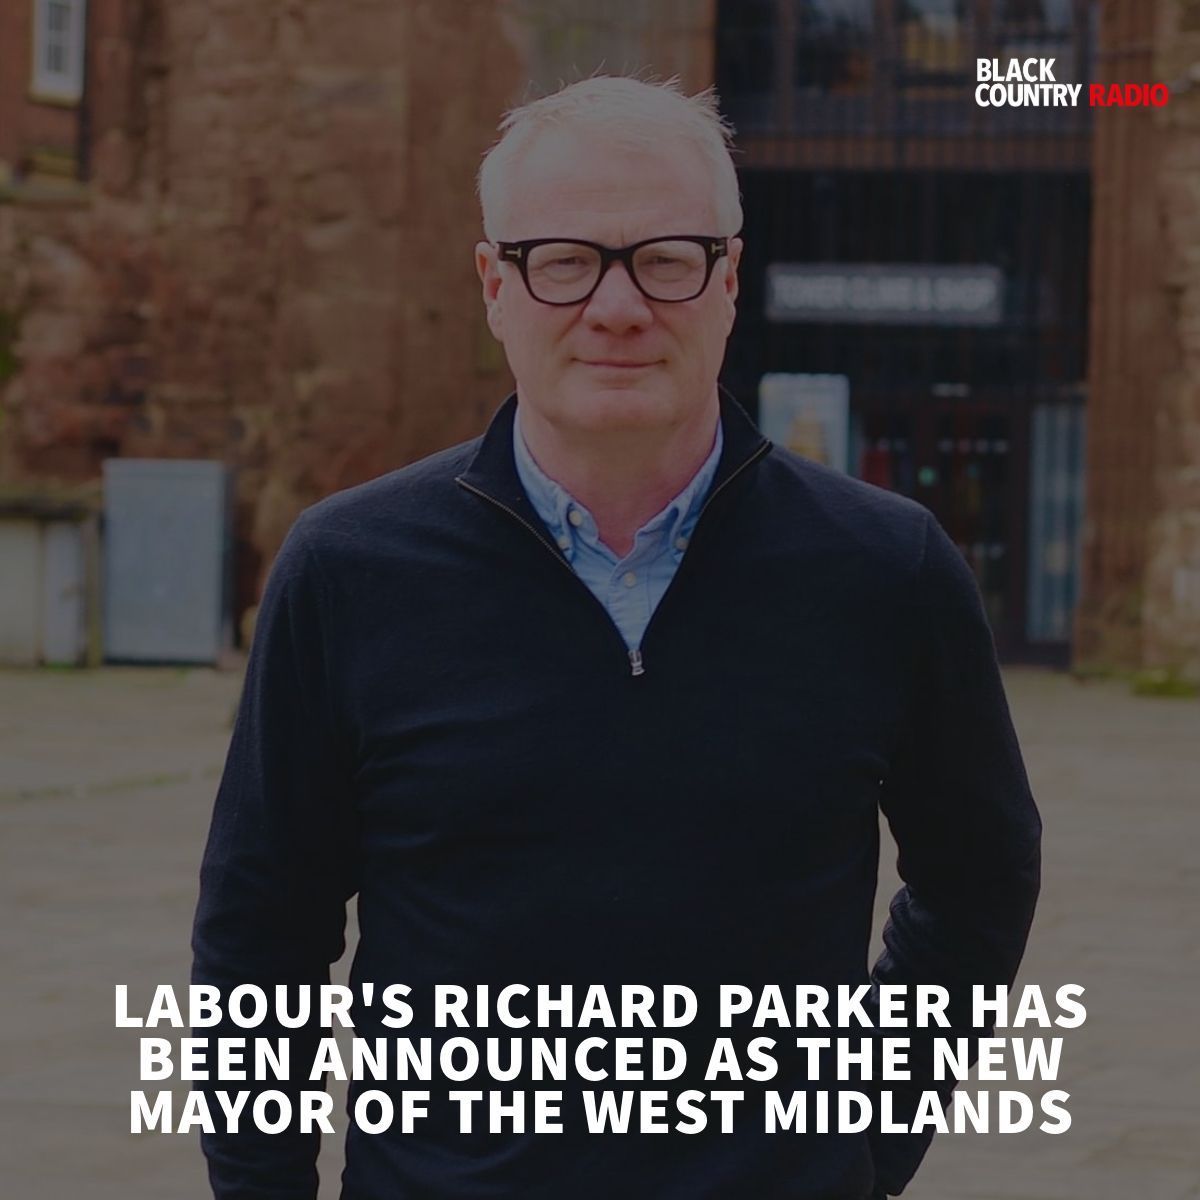 Labour candidate, @RichardParkerLab has been elected as the new Mayor of the West Midlands by 1508 votes.